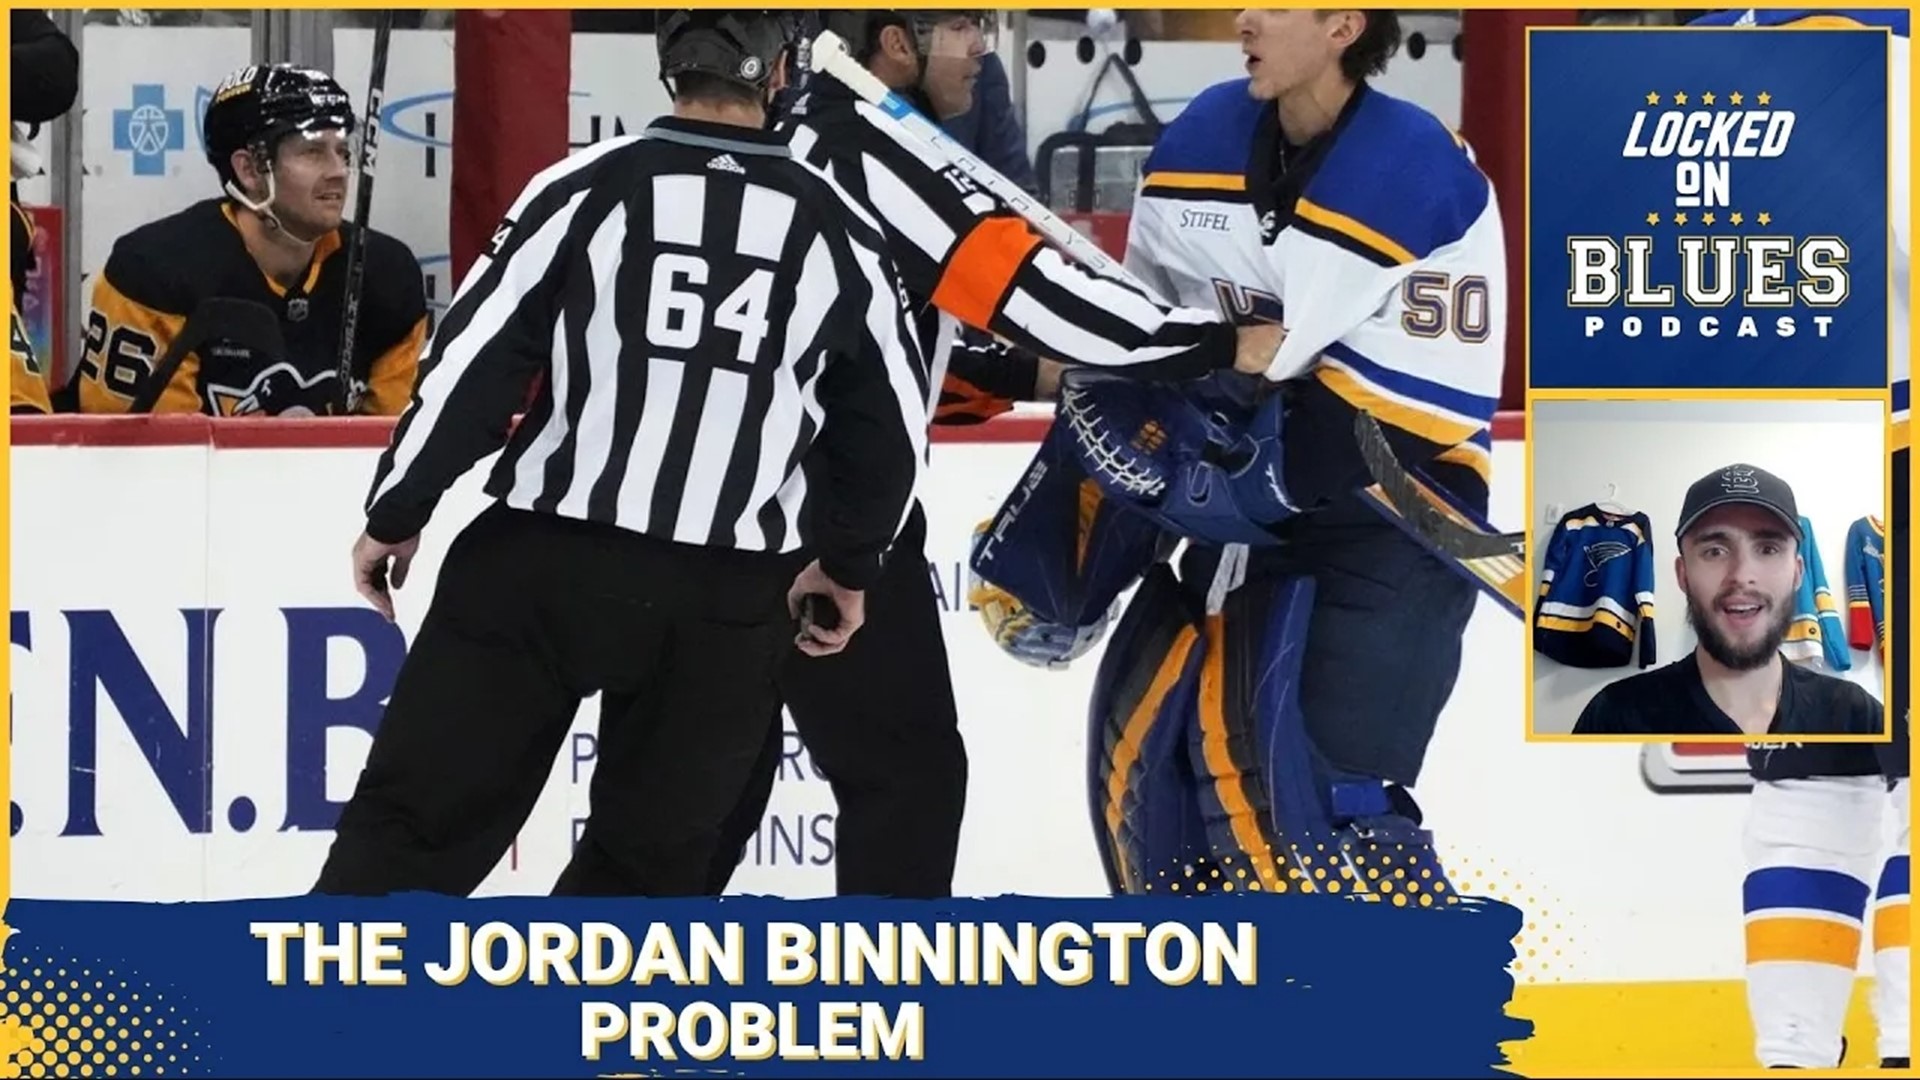 Josh Hyman breaks down the recent struggles of Jordan Binnington and the Blues as a whole. He then breaks down the upcoming game against the Islanders.